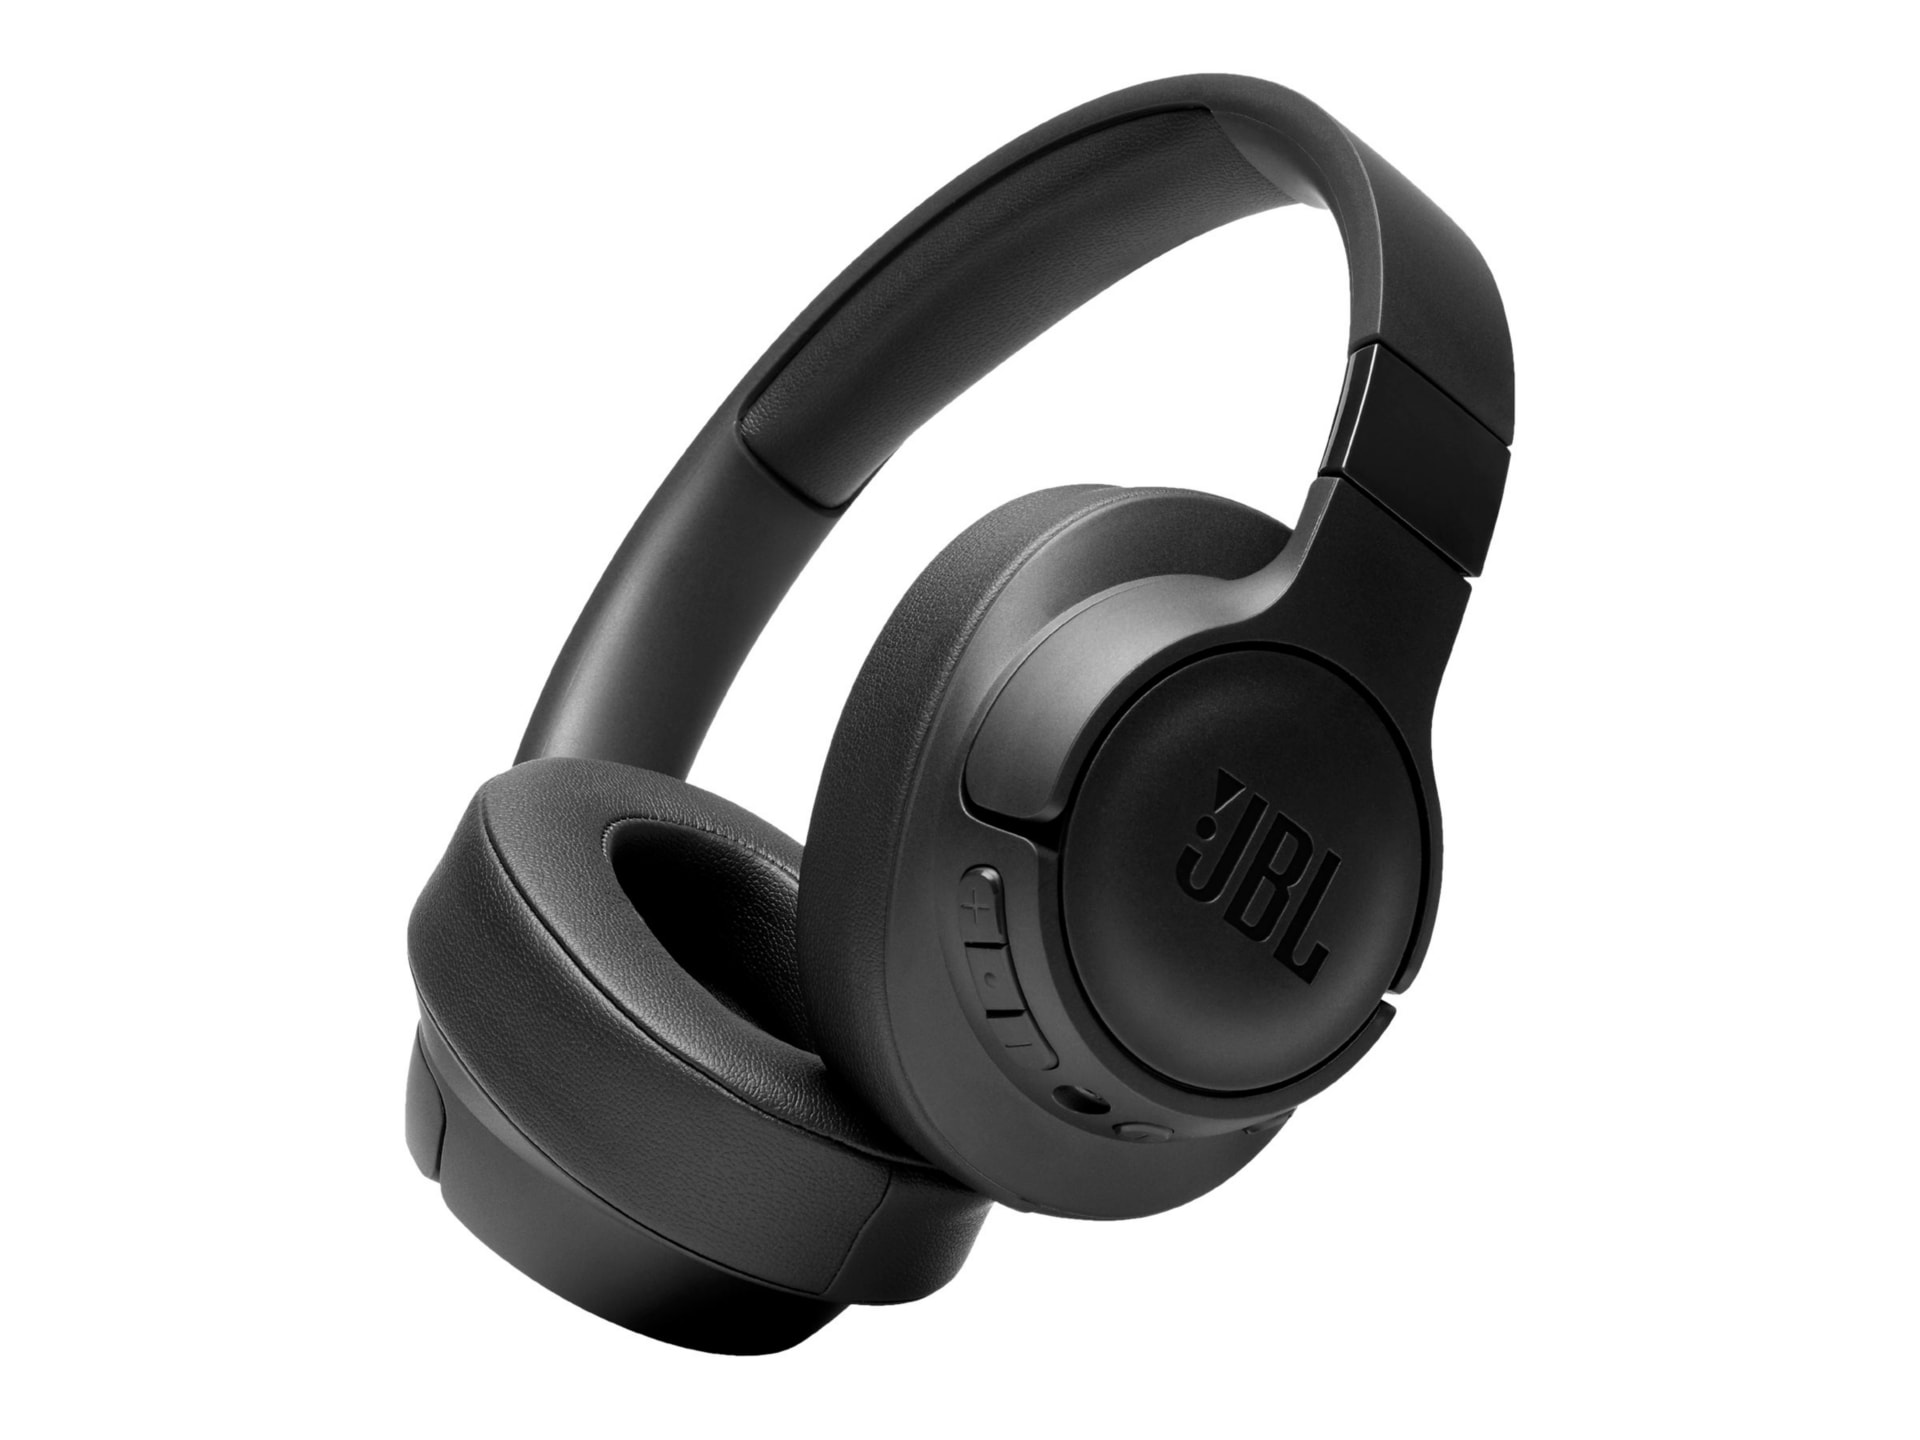 JBL upgrades its 2024 wireless headphones with massive battery life